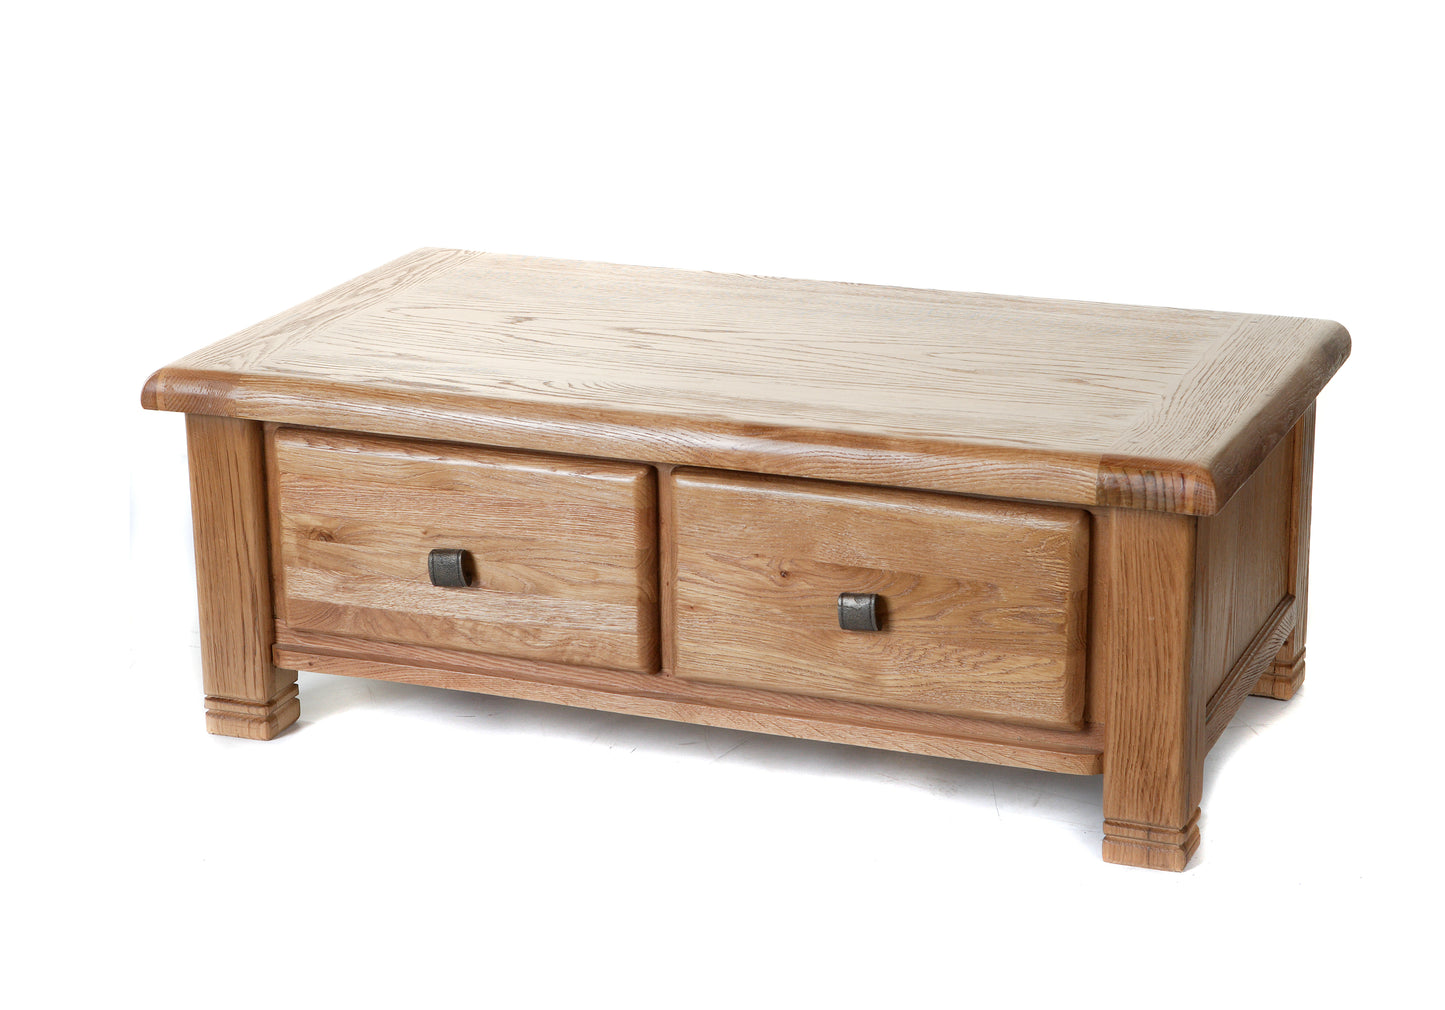 Danube Oak Coffee Table with Drawer